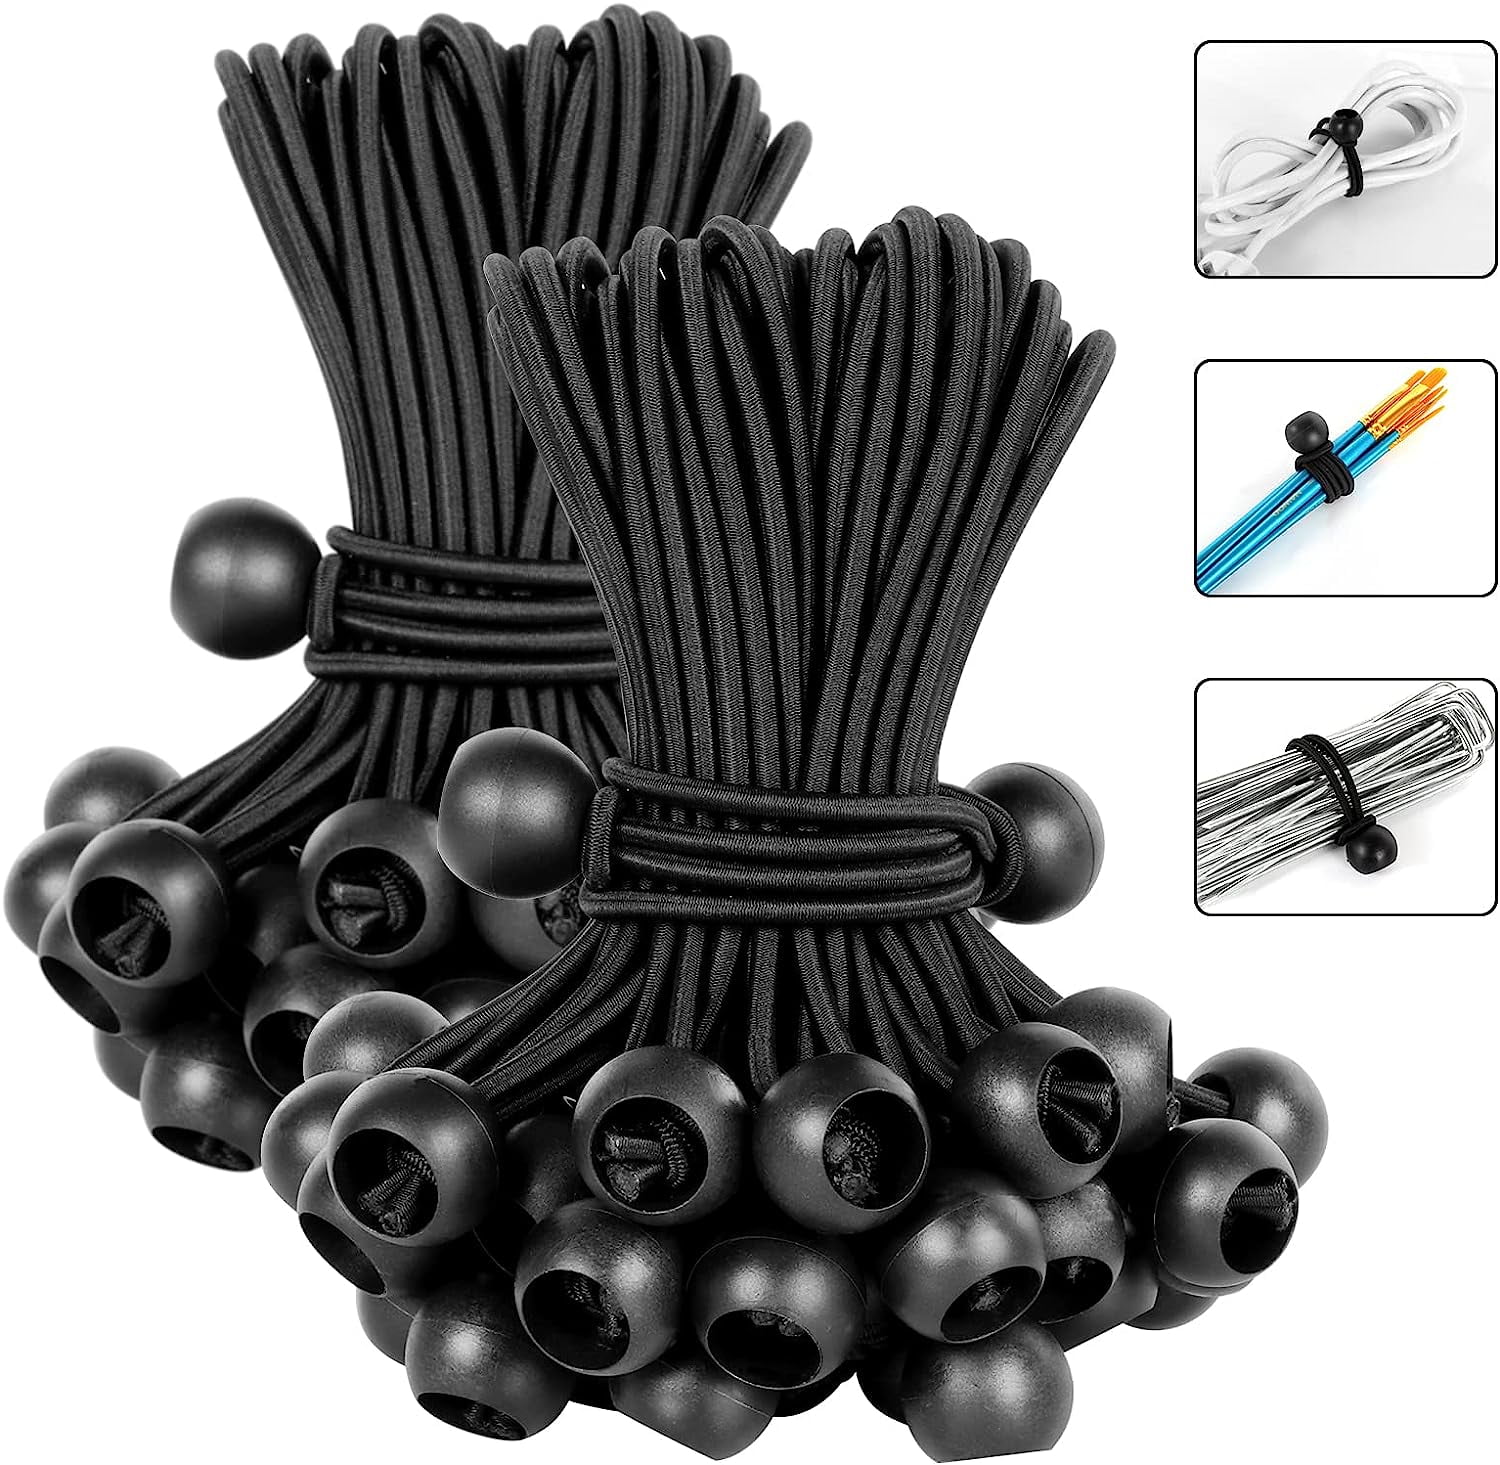 SGT KNOTS Marine Grade Bungee Cord - 100% Elastic Cord, Dacron Polyester  Bungee Shock Cord for DIY, Tie Downs, Commercial Uses | 1/4 x 10ft, Black